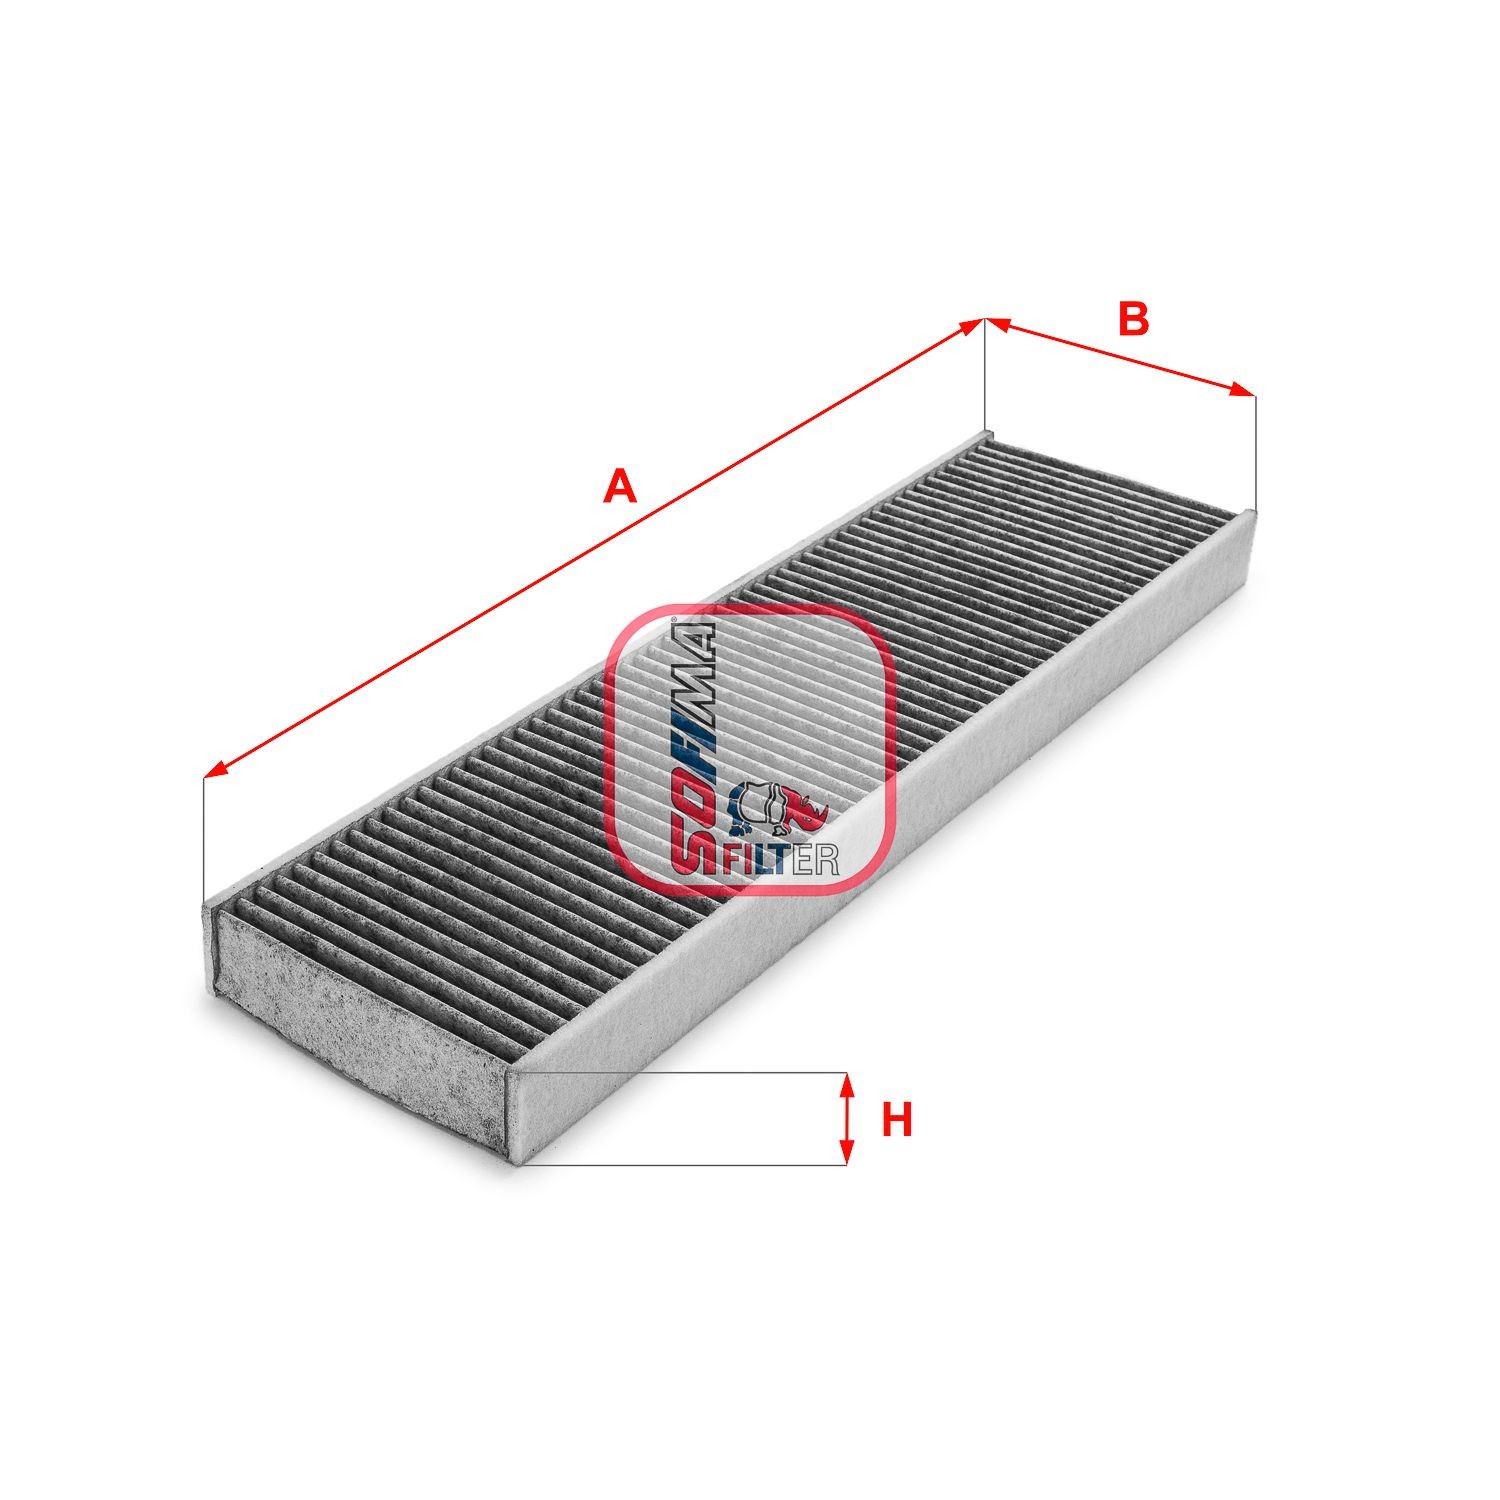 SOFIMA Activated Carbon Filter, 440 mm x 118 mm x 30 mm Width: 118mm, Height: 30mm, Length: 440mm Cabin filter S 4175 CA buy